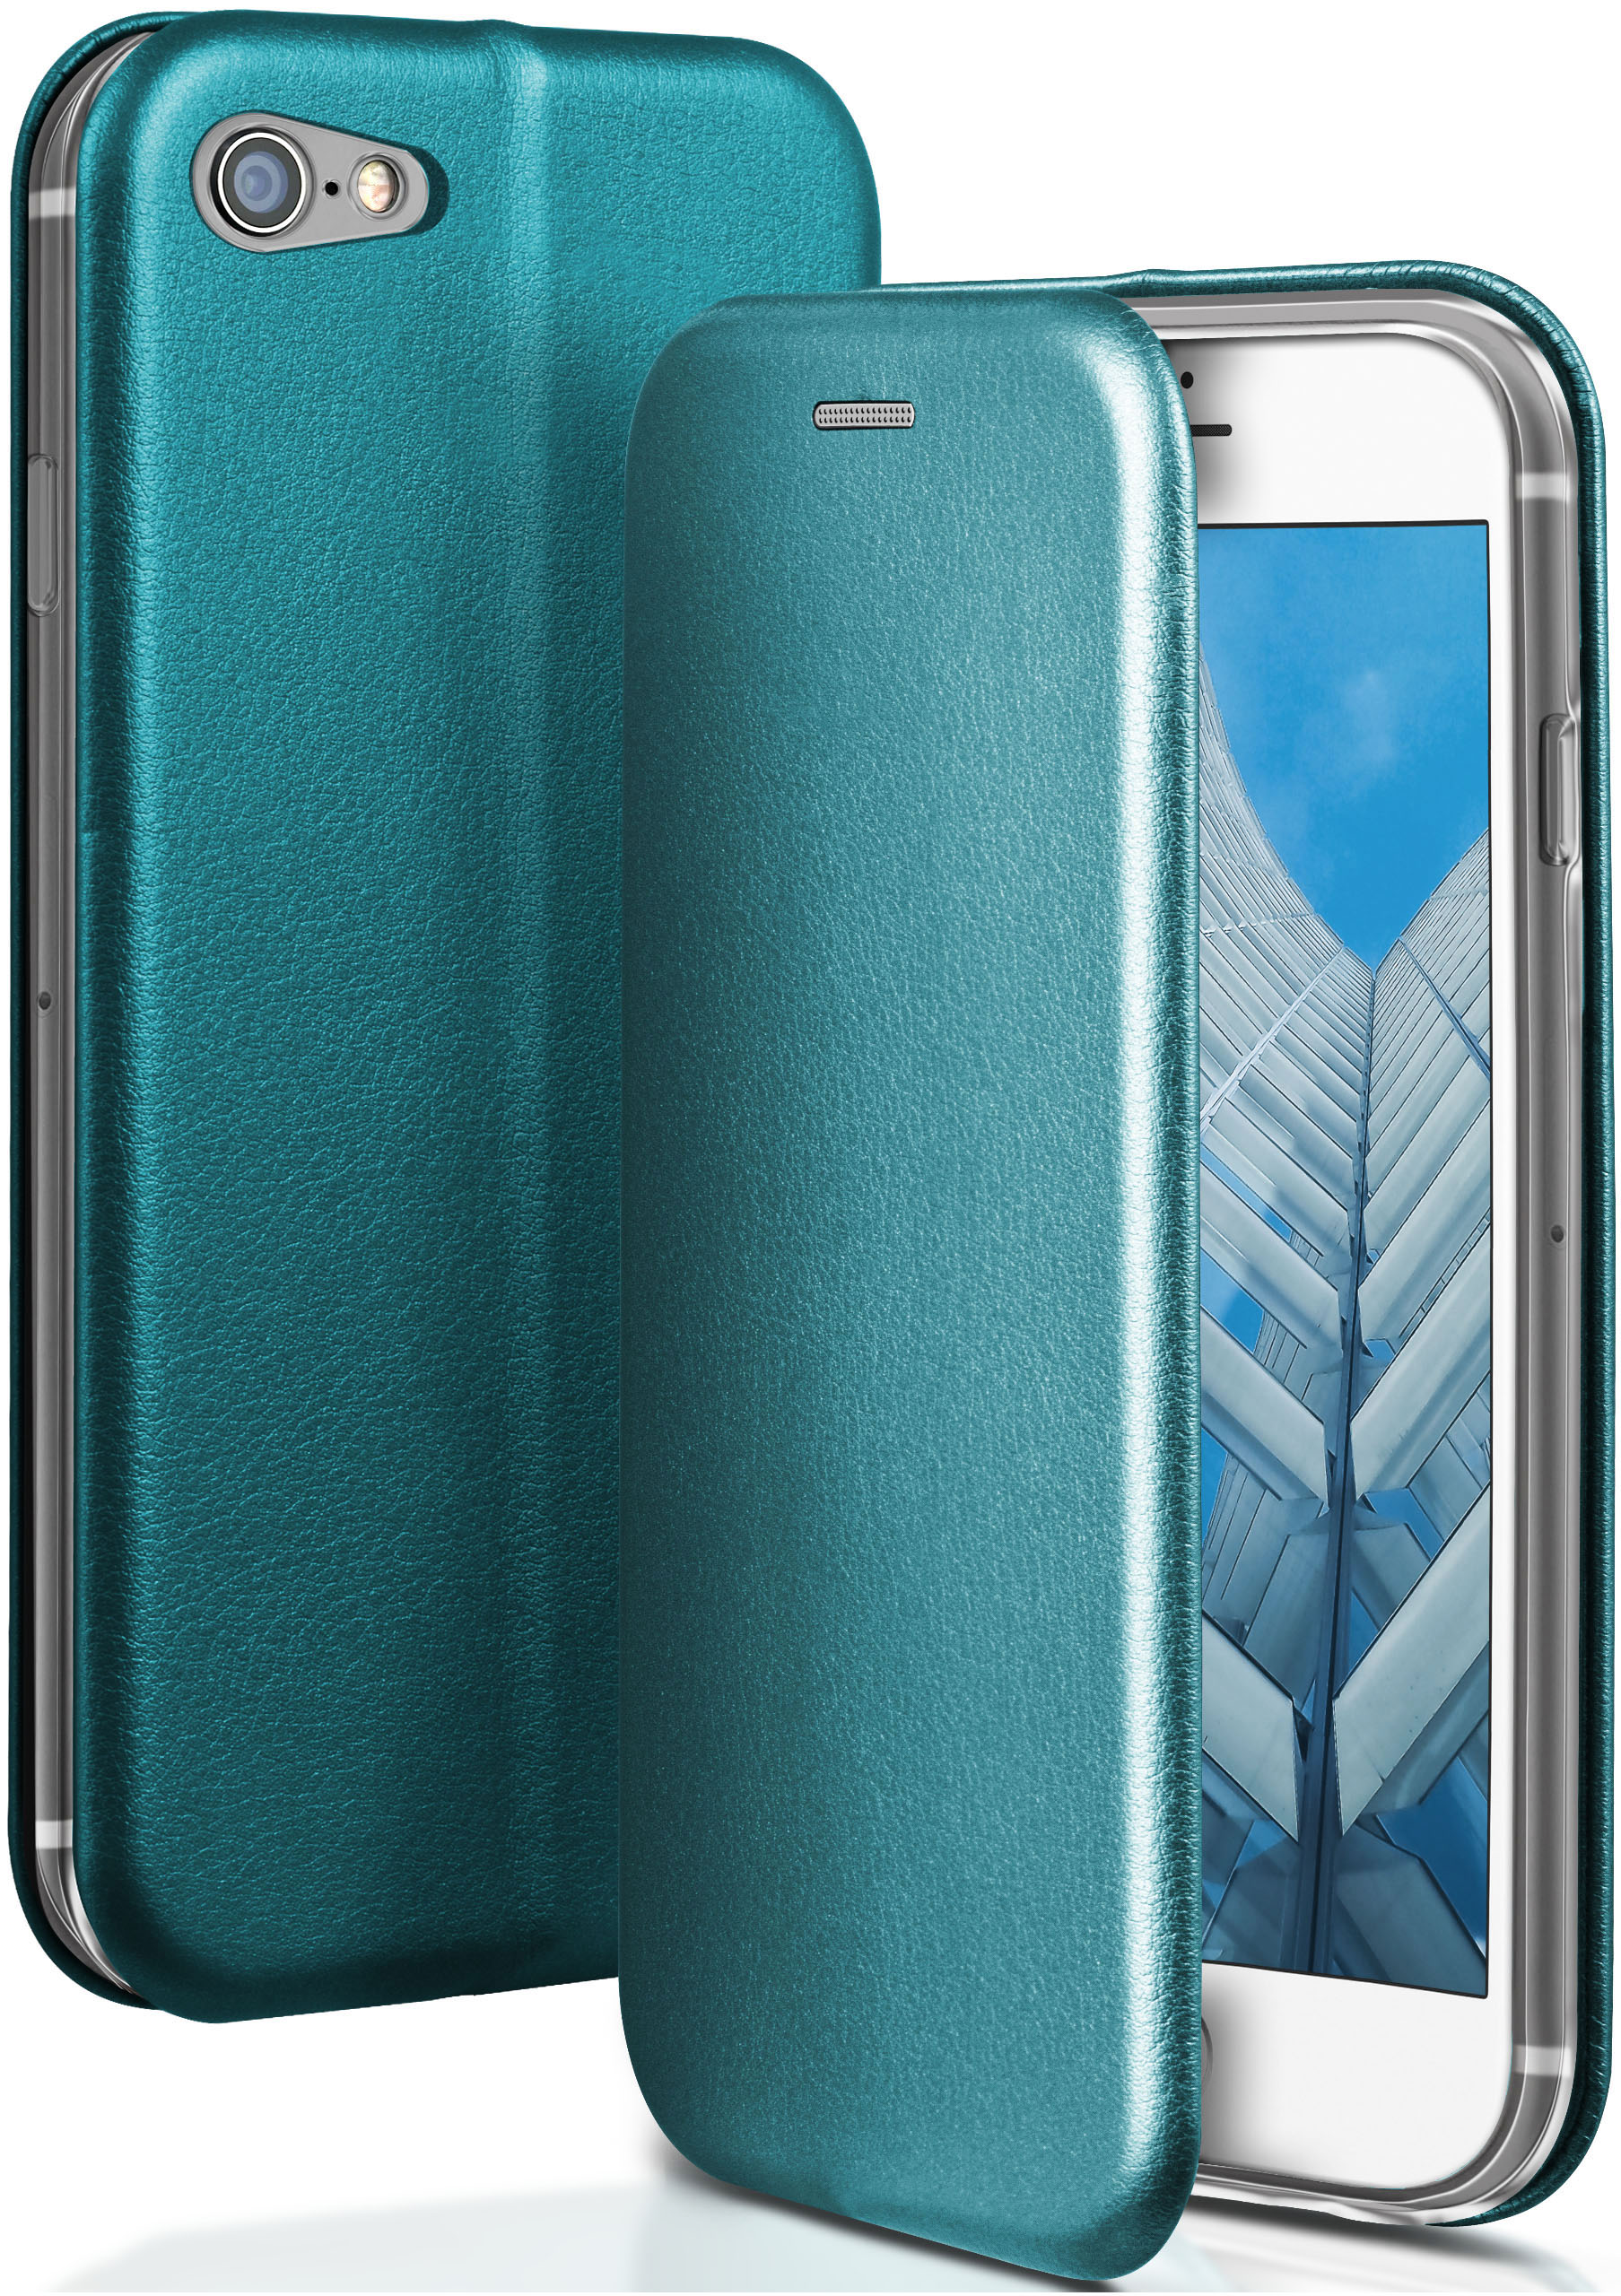 ONEFLOW Business Case, Apple, Cover, 7 Flip 8, / iPhone iPhone Worldwide - Blue